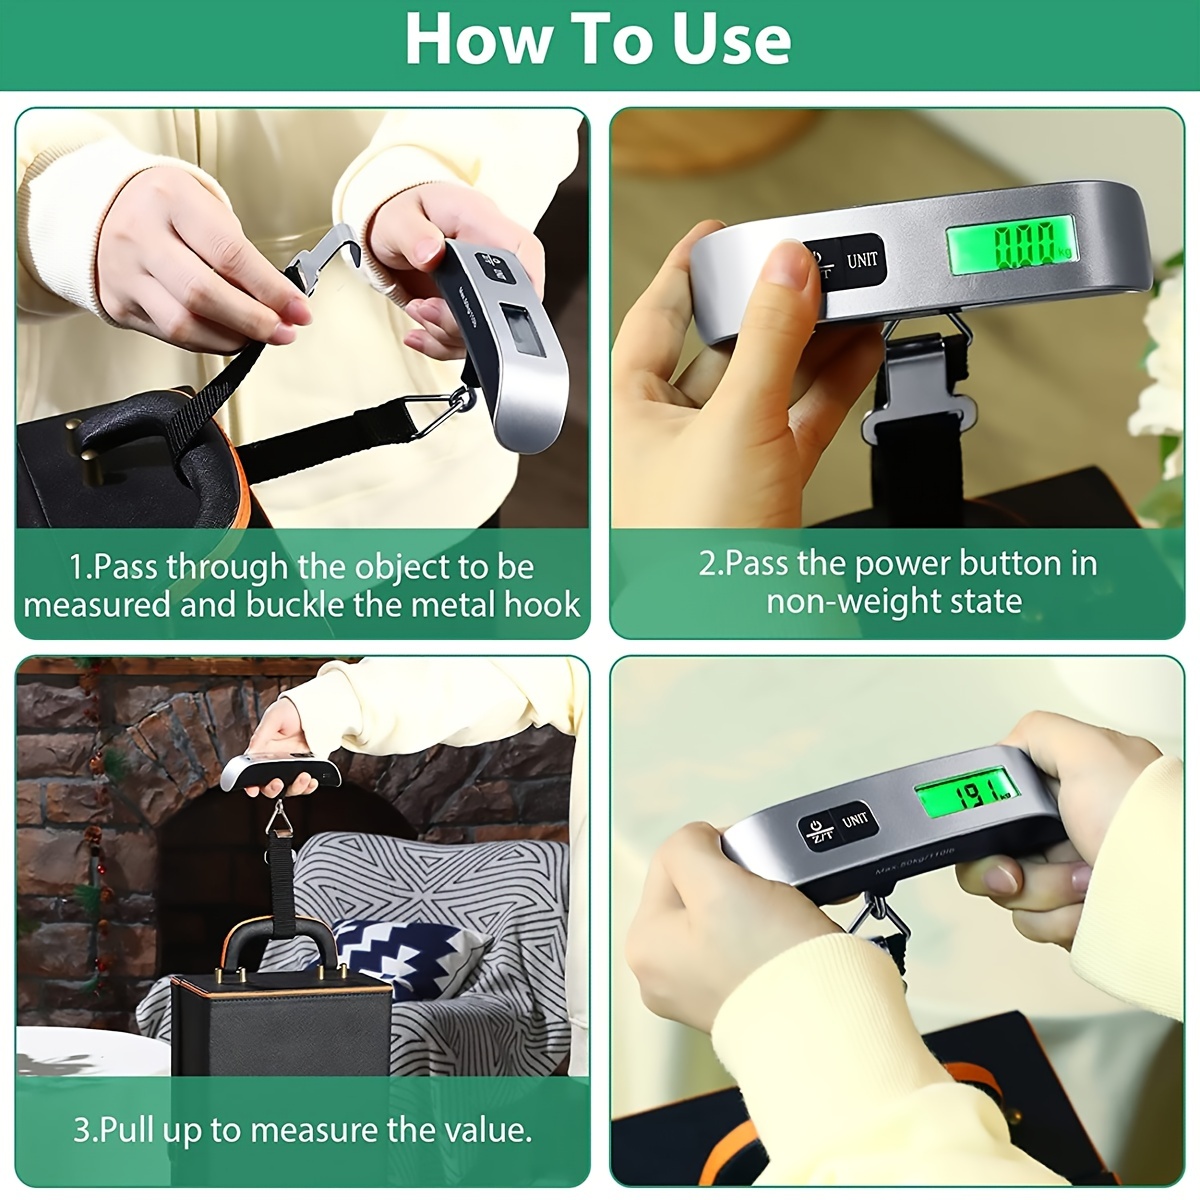 Portable Luggage Scale, LCD Digital Luggage Scale, Use for Weighing  Luggage, Vegetables, Etc